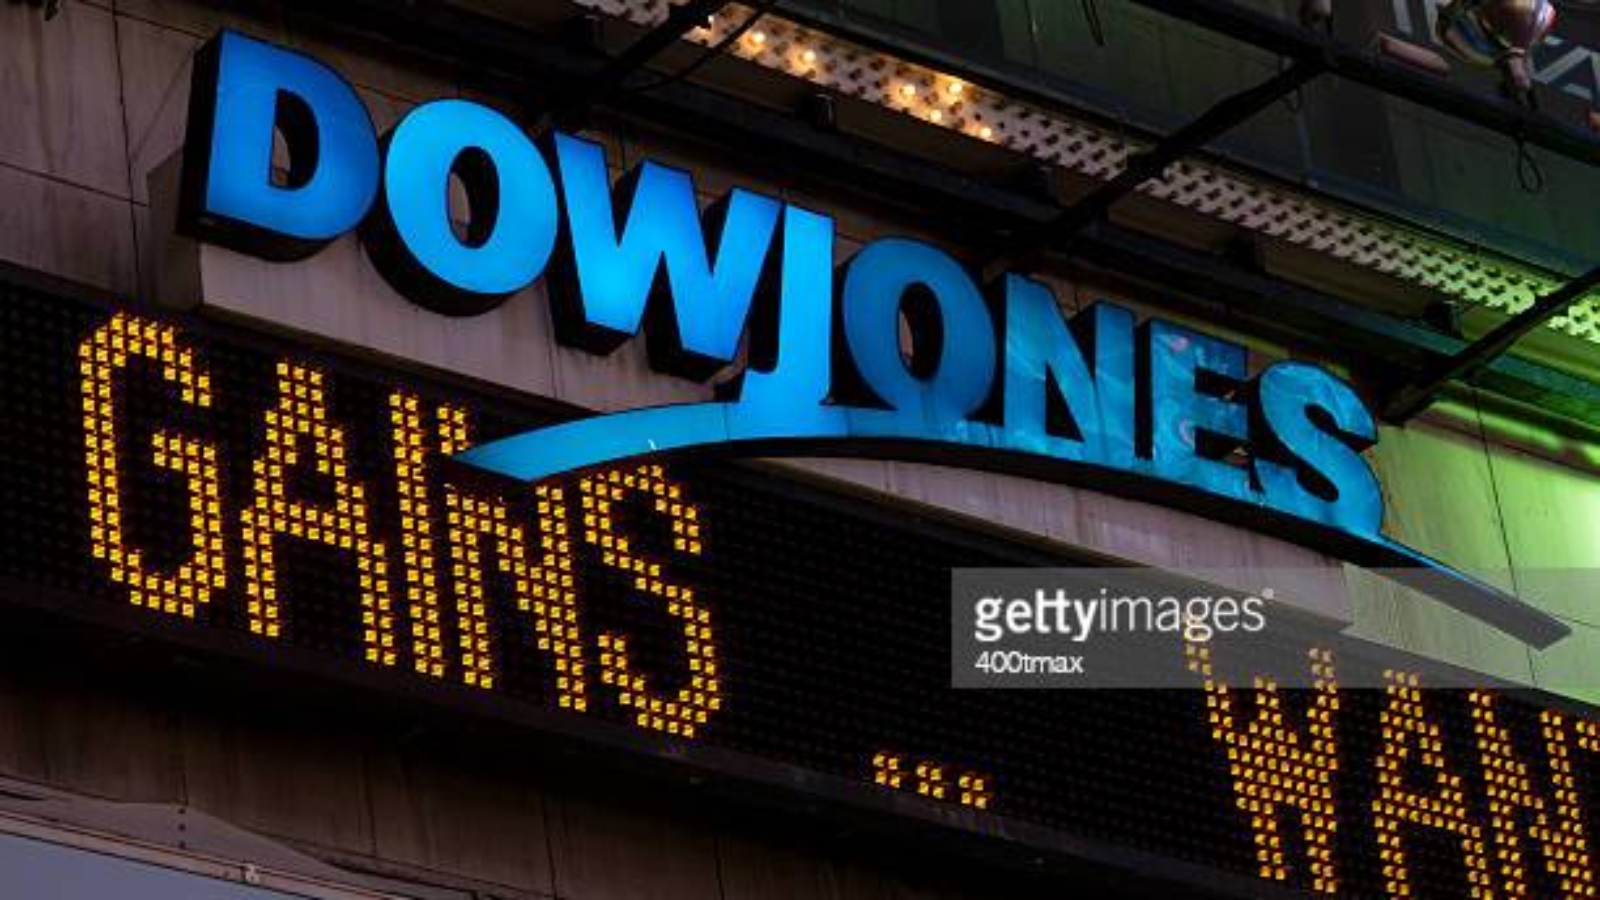 New York, USA - July 29, 2016: The illuminated Dow Jones sign in times square late in the night as the latest news streams on the led board.